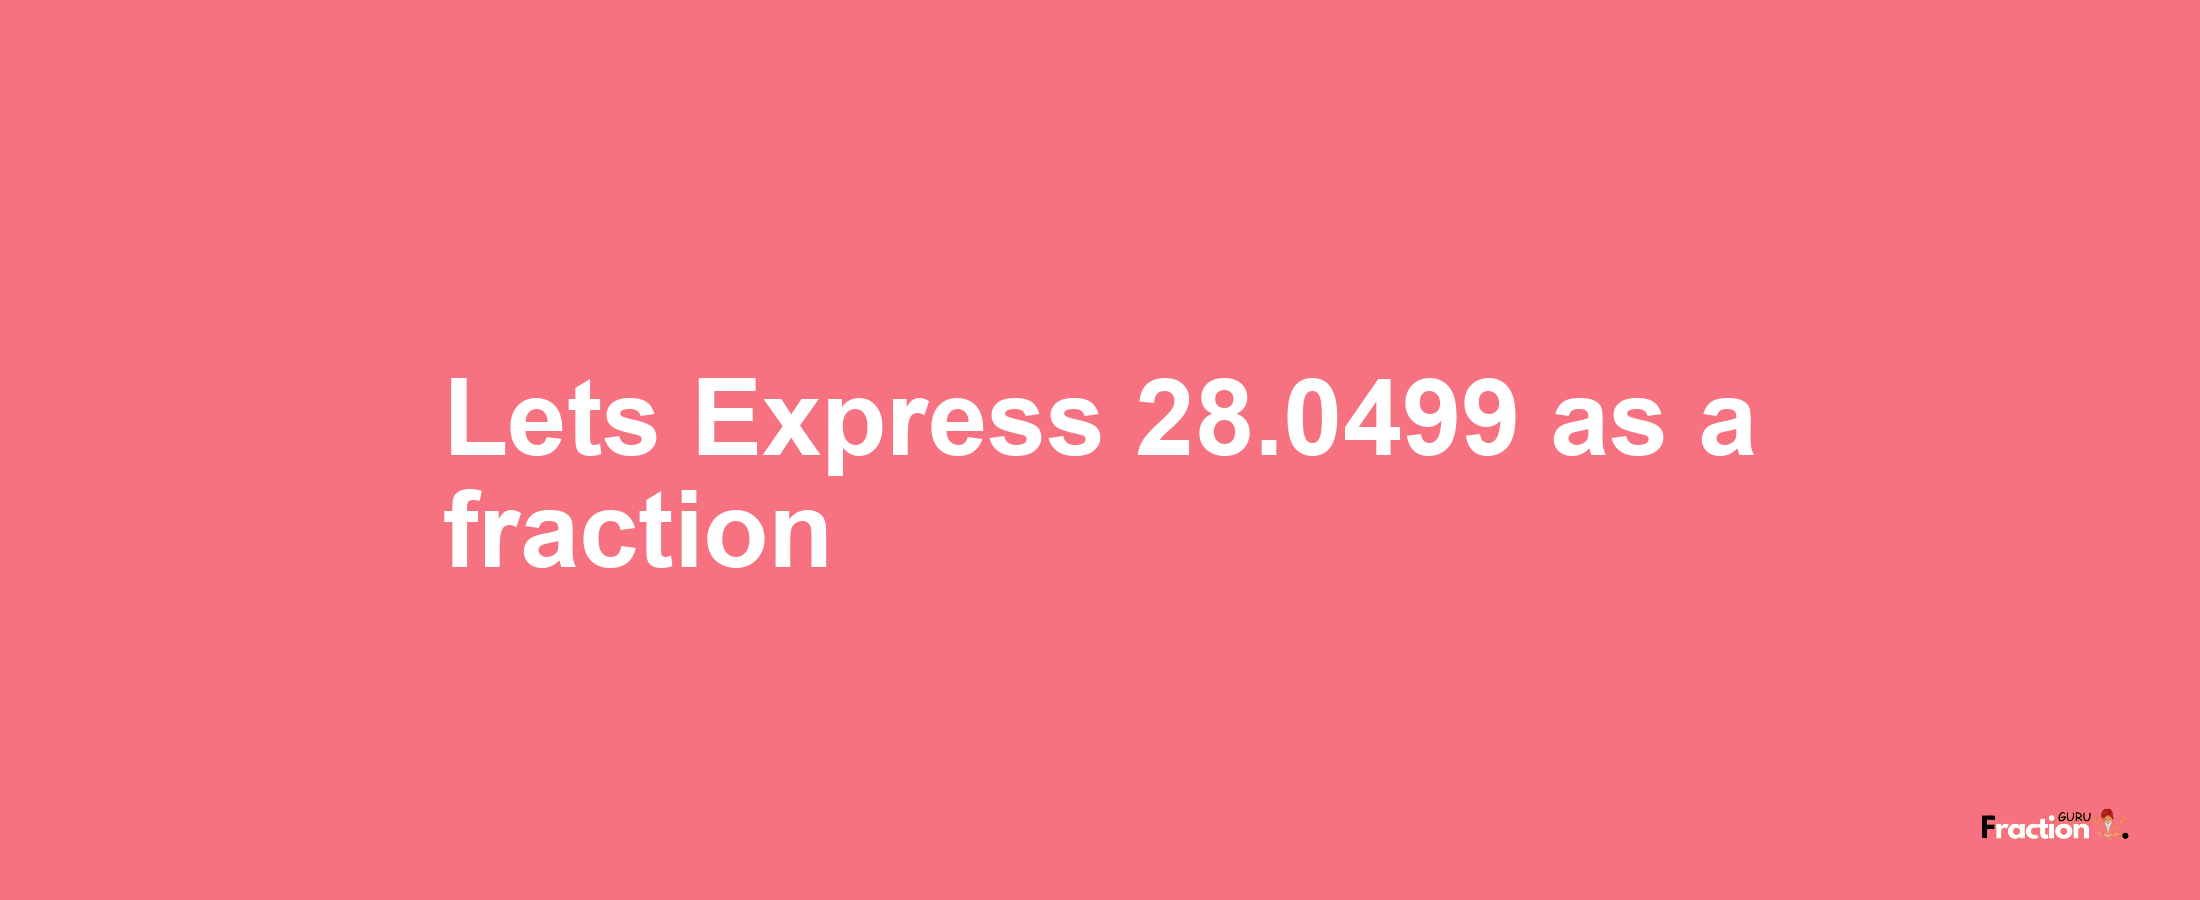 Lets Express 28.0499 as afraction